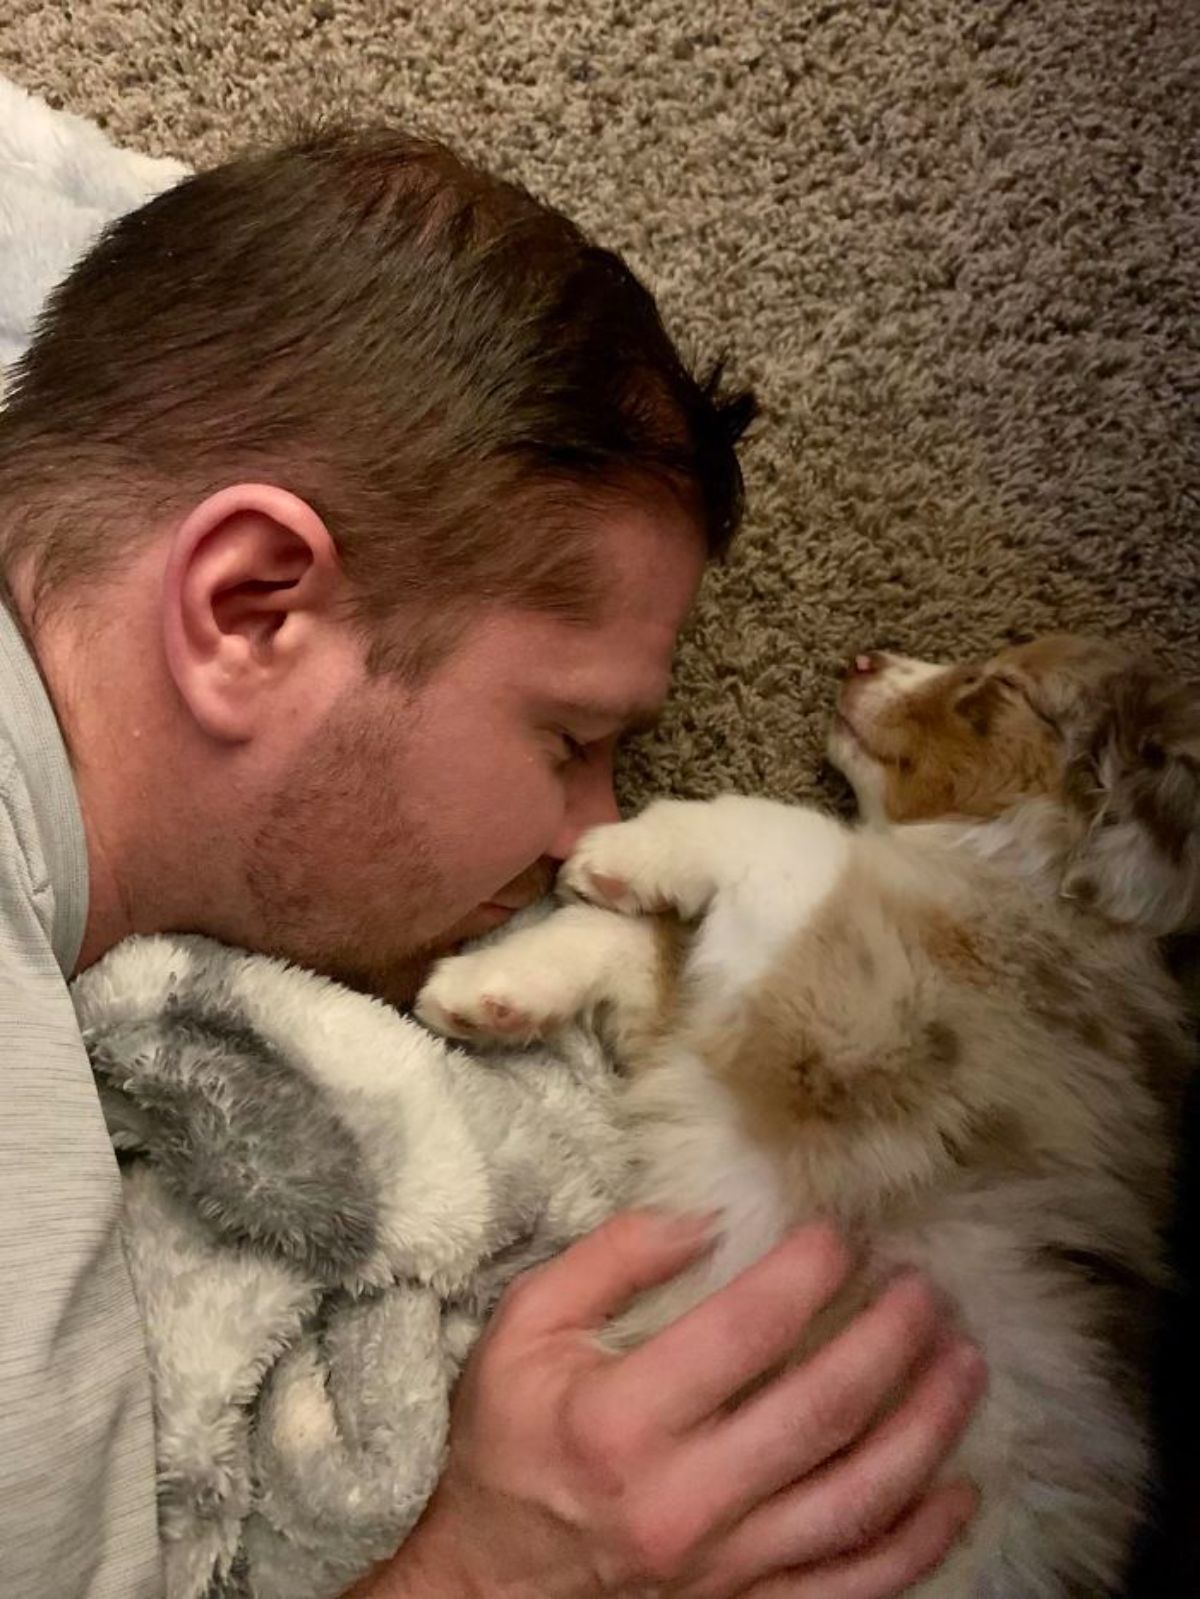 brown and white sleeping puppy laying next to a sleeping man with a grey and white blanket between them